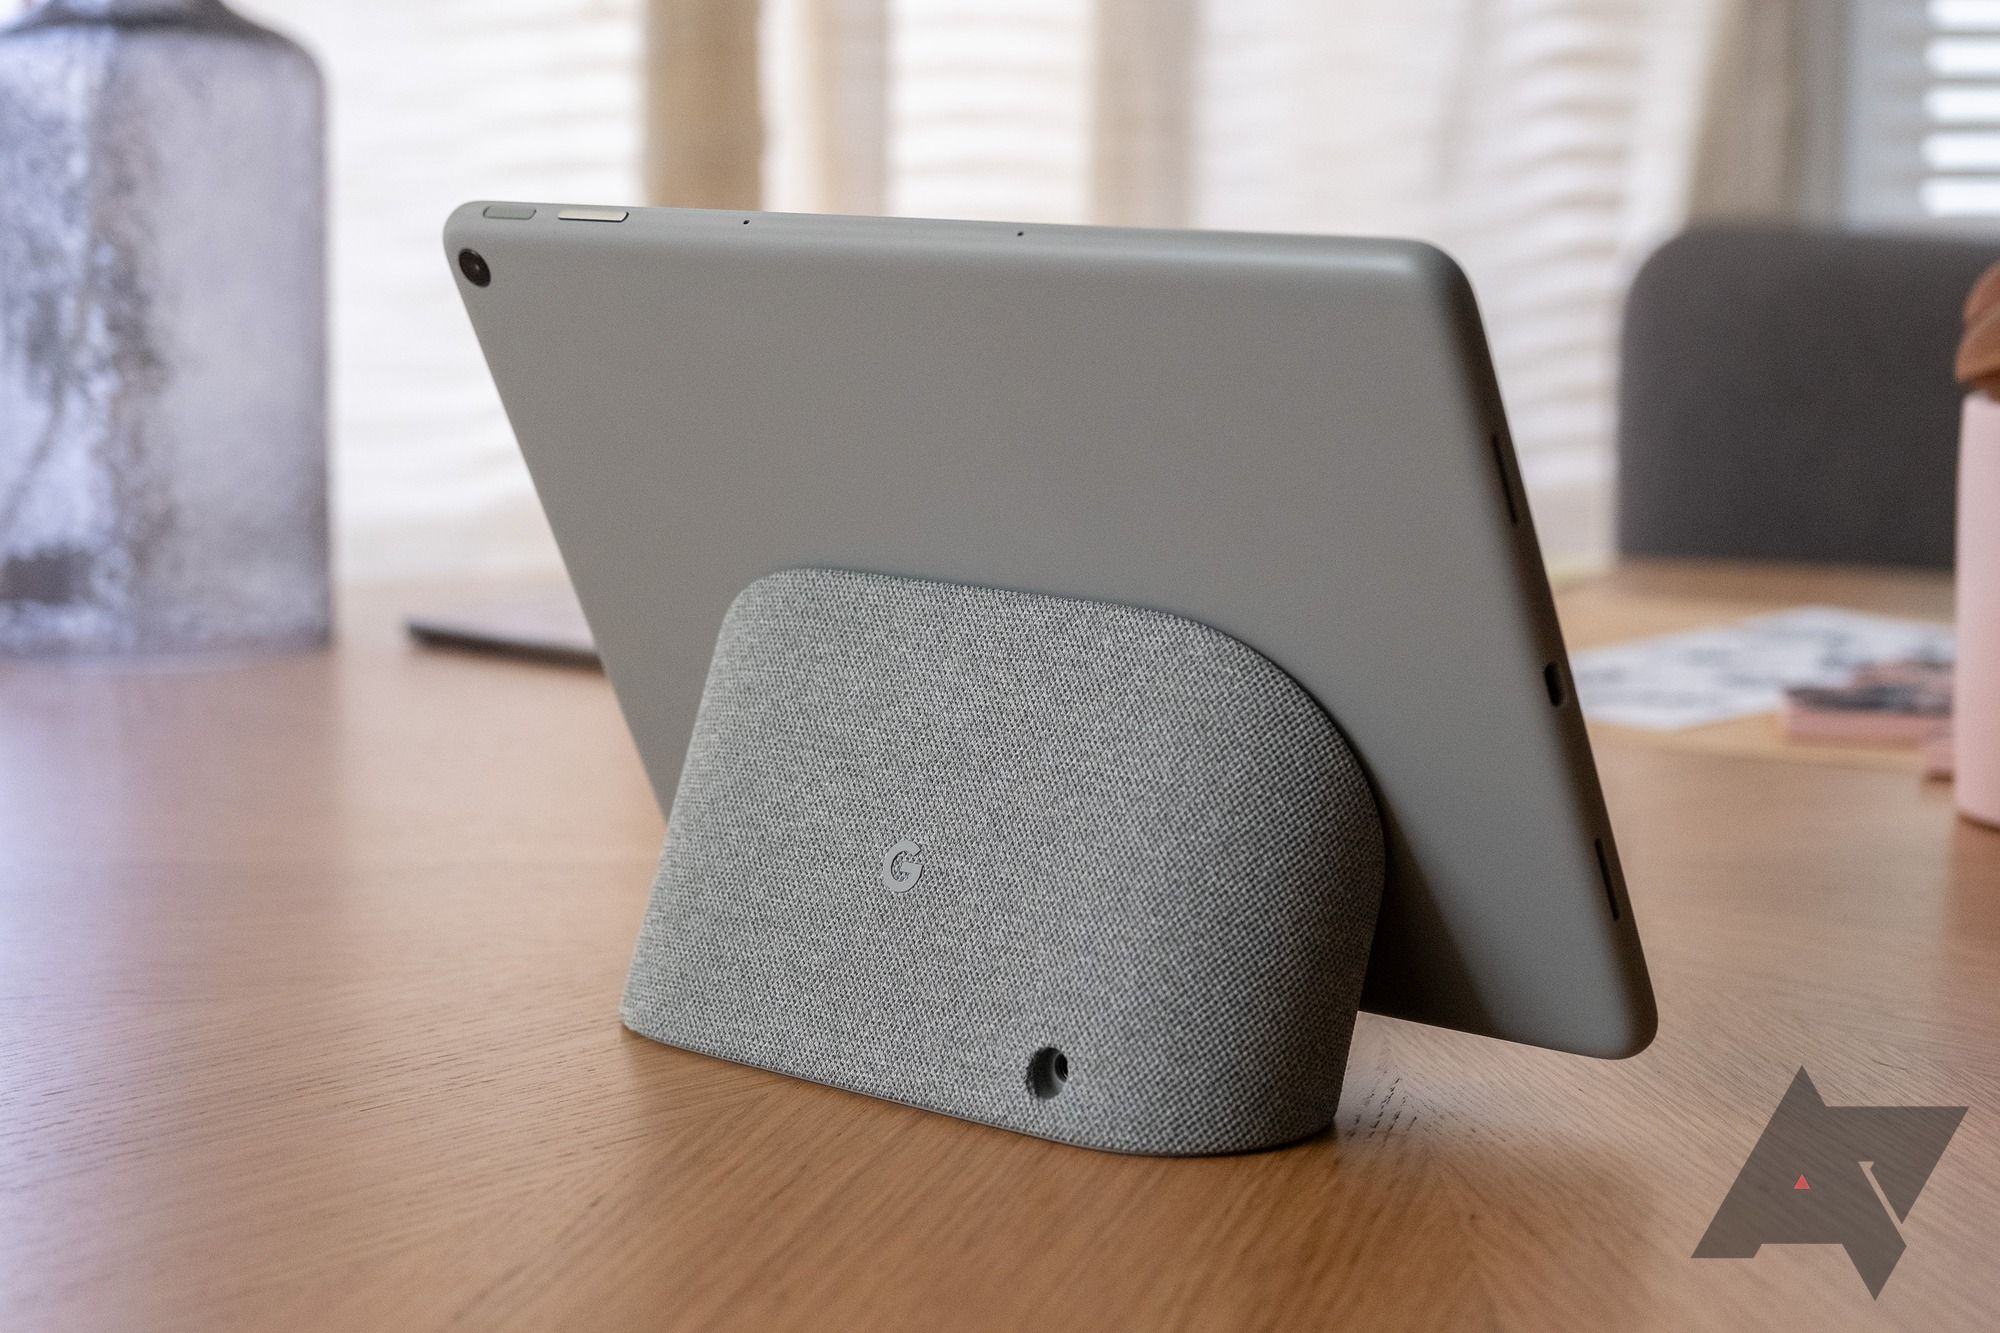 The Google Pixel Tablet sitting on a stand showing the back view.